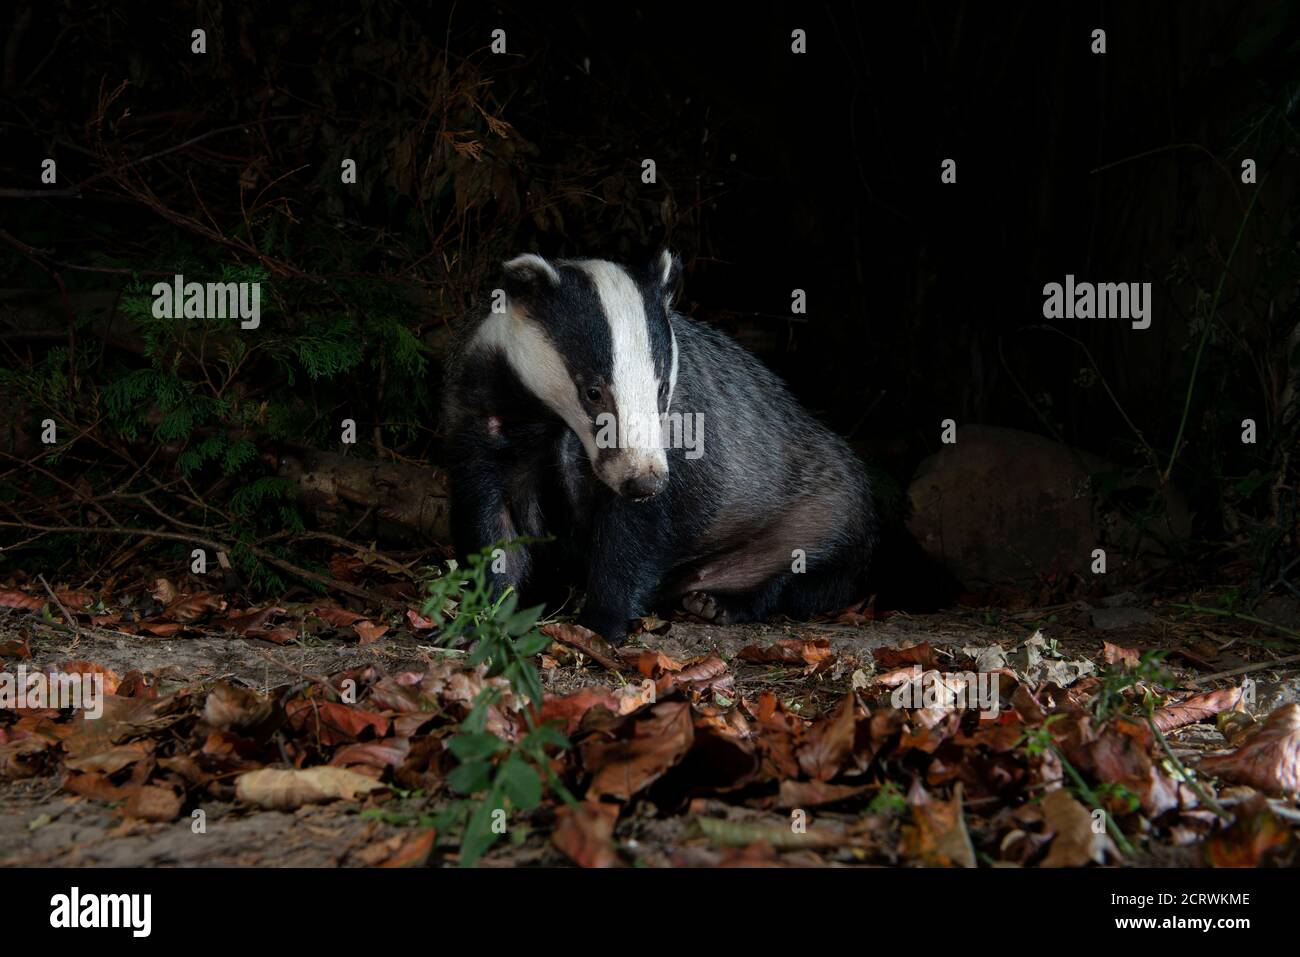 Badger at night sitting in dead leaves with bushes behind looking forwards Stock Photo